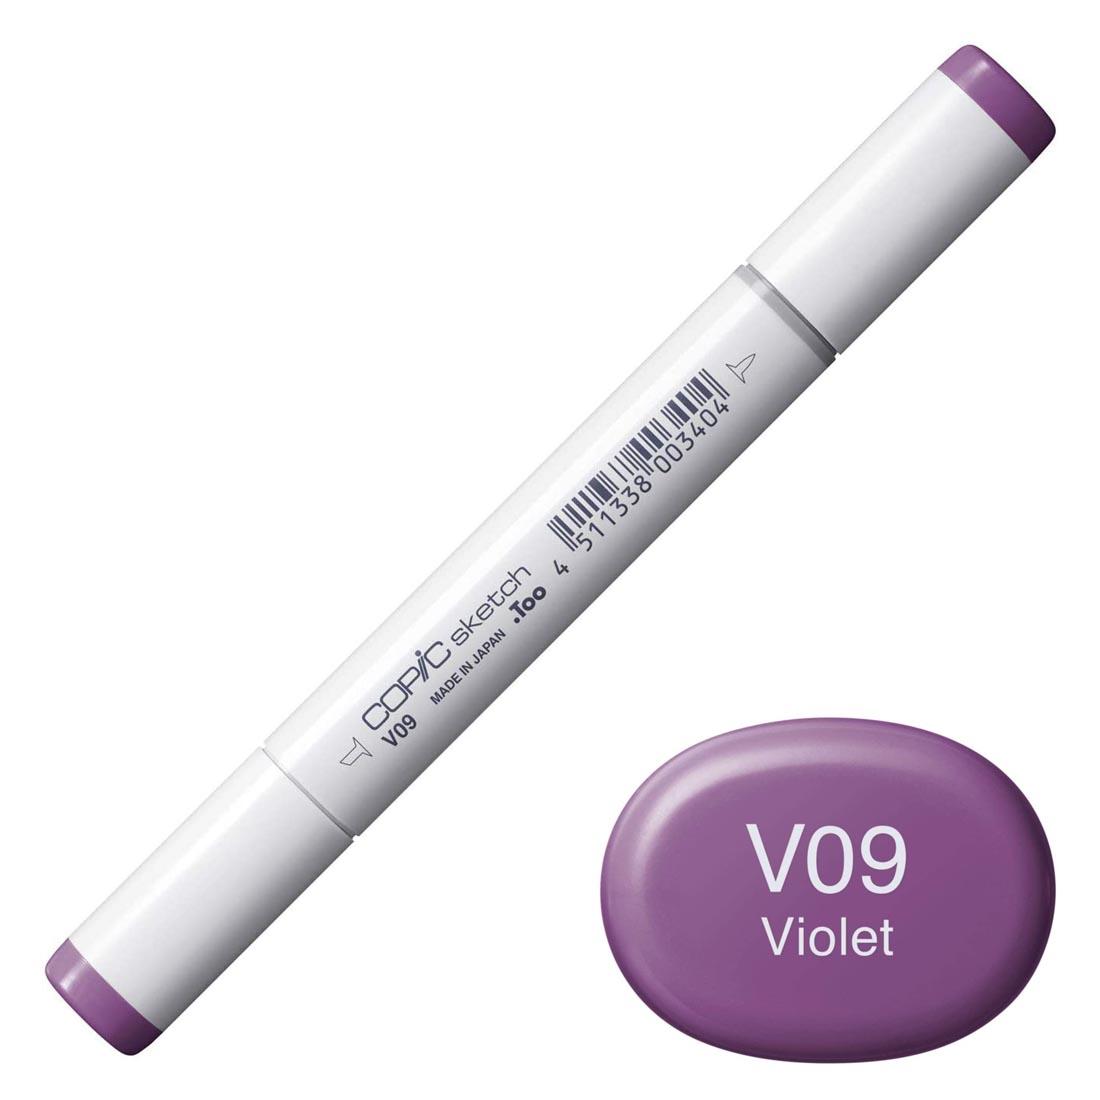 COPIC Sketch Marker with a color swatch and text of V09 Violet